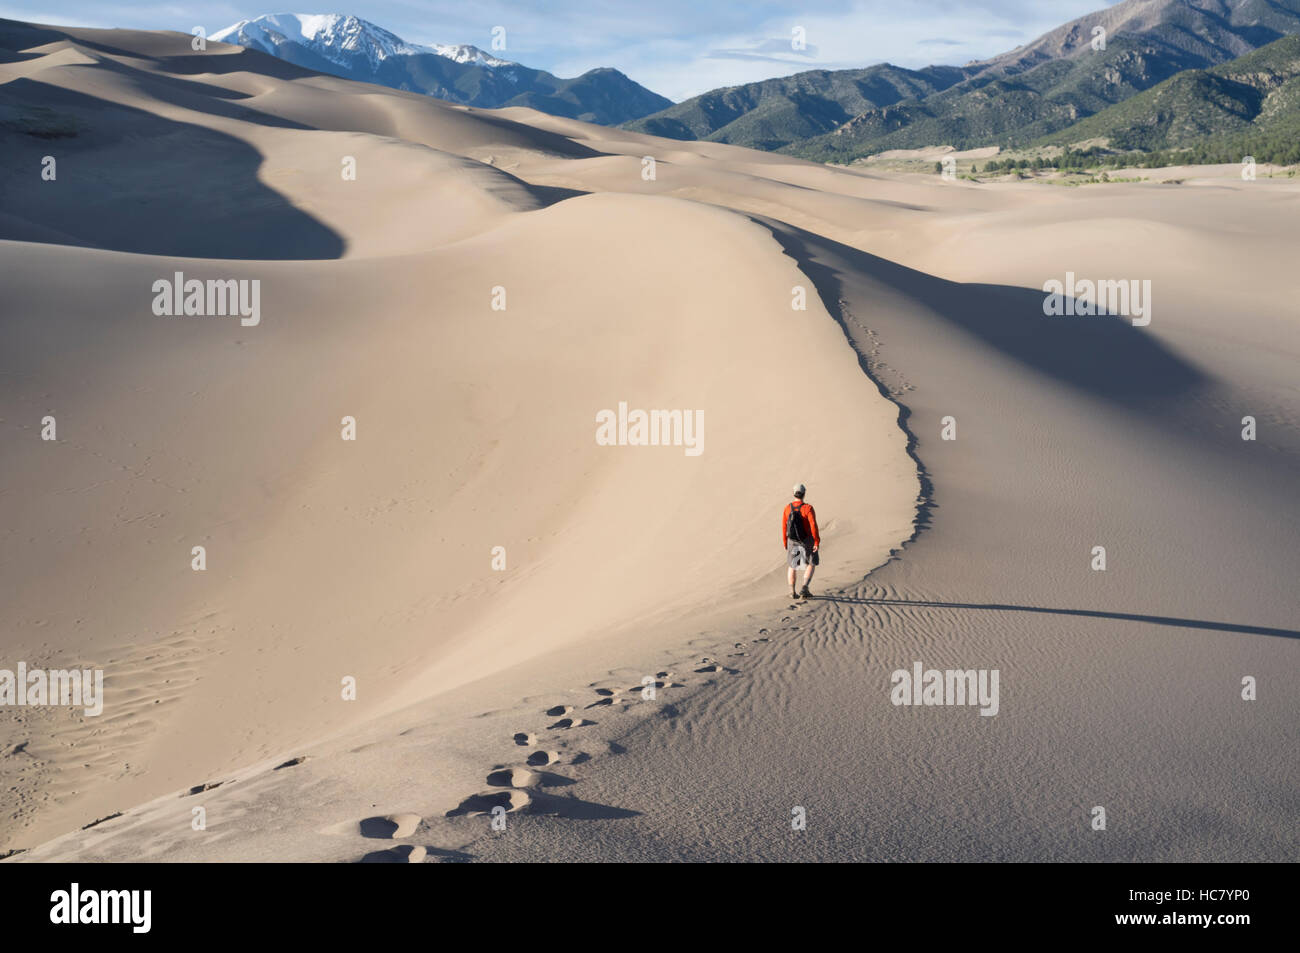 Saguache County, Colorado: Man walking along High Dune at Great Sand Dunes National Park and Preserve. Stock Photo